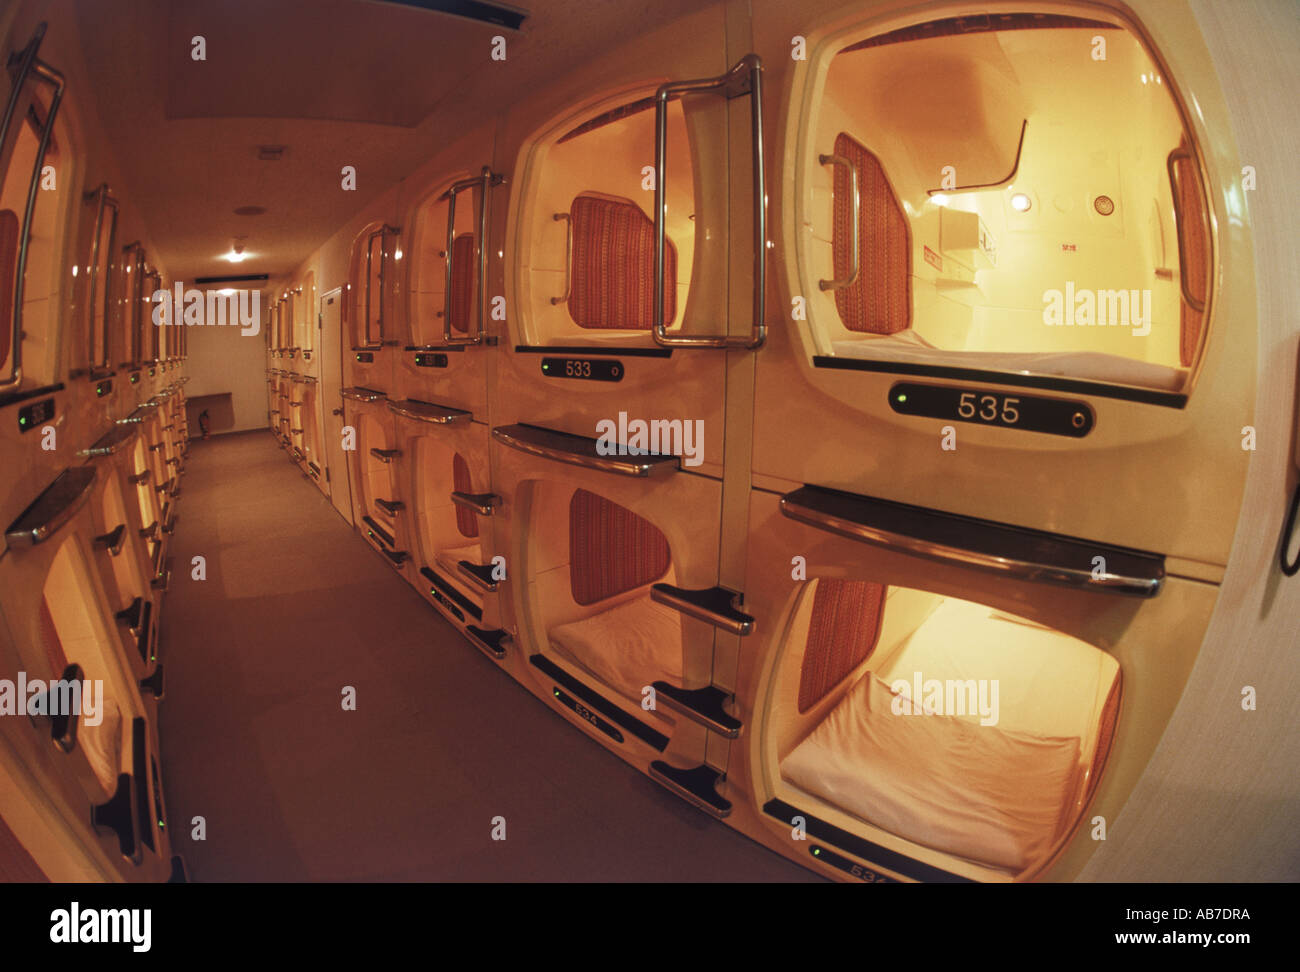 Traditional businessman's capsule hotel with small individual rooms or personal compartments in Japan Stock Photo